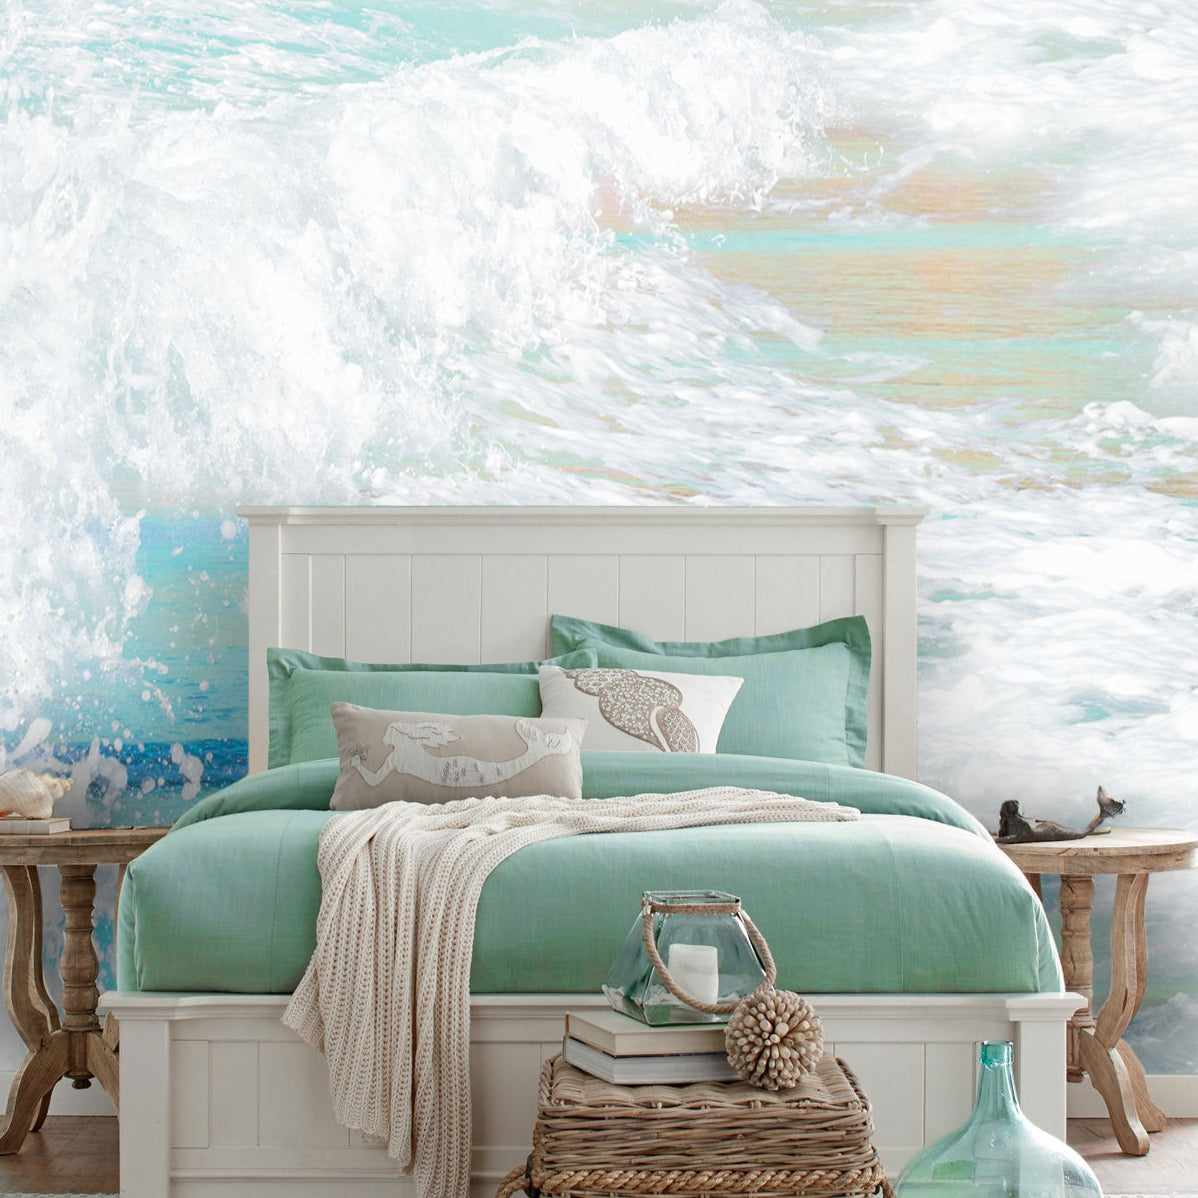 Sea Waves Beach Setting | Wall Mural by Back to the Wall